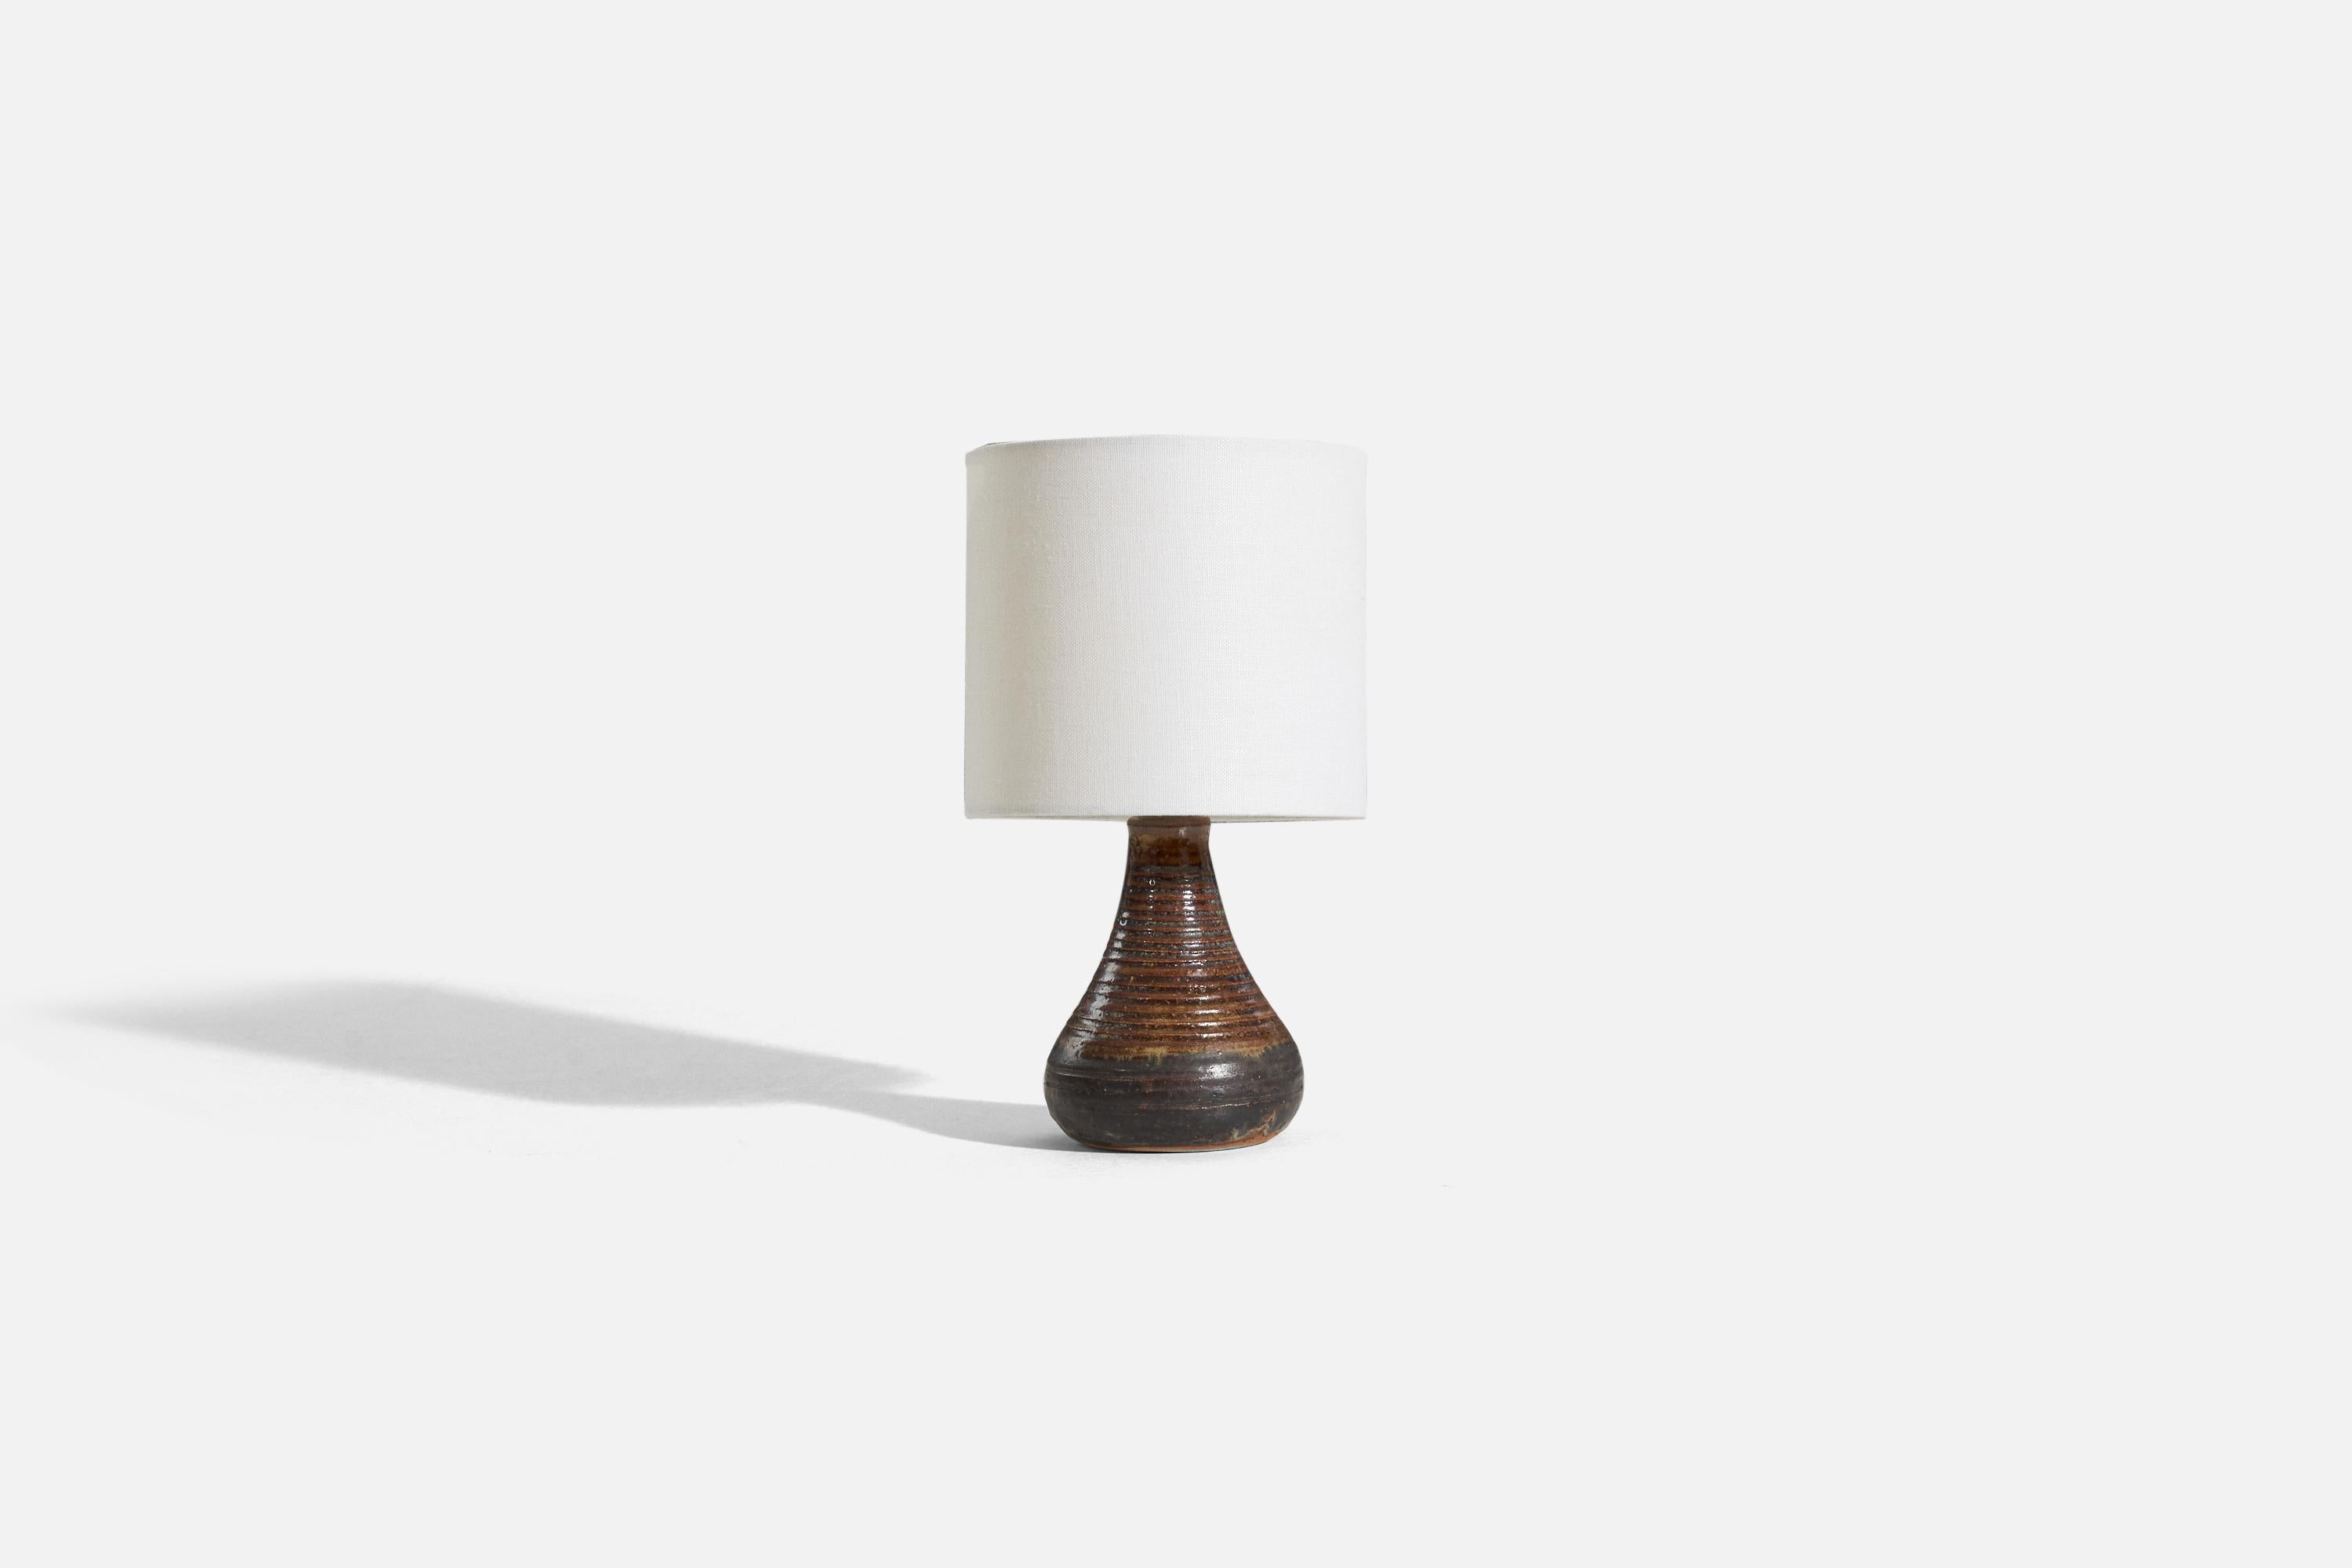 A brown and black, glazed stoneware table lamp, designed by Eva Bengtsson and produced for Åsbo Keramik, Sweden, c. 1970s.

Sold without lampshade. 
Dimensions of Lamp (inches) : 7.25 x 3.875 x 3.875 (H x W x D)
Dimensions of Shade (inches) : 6